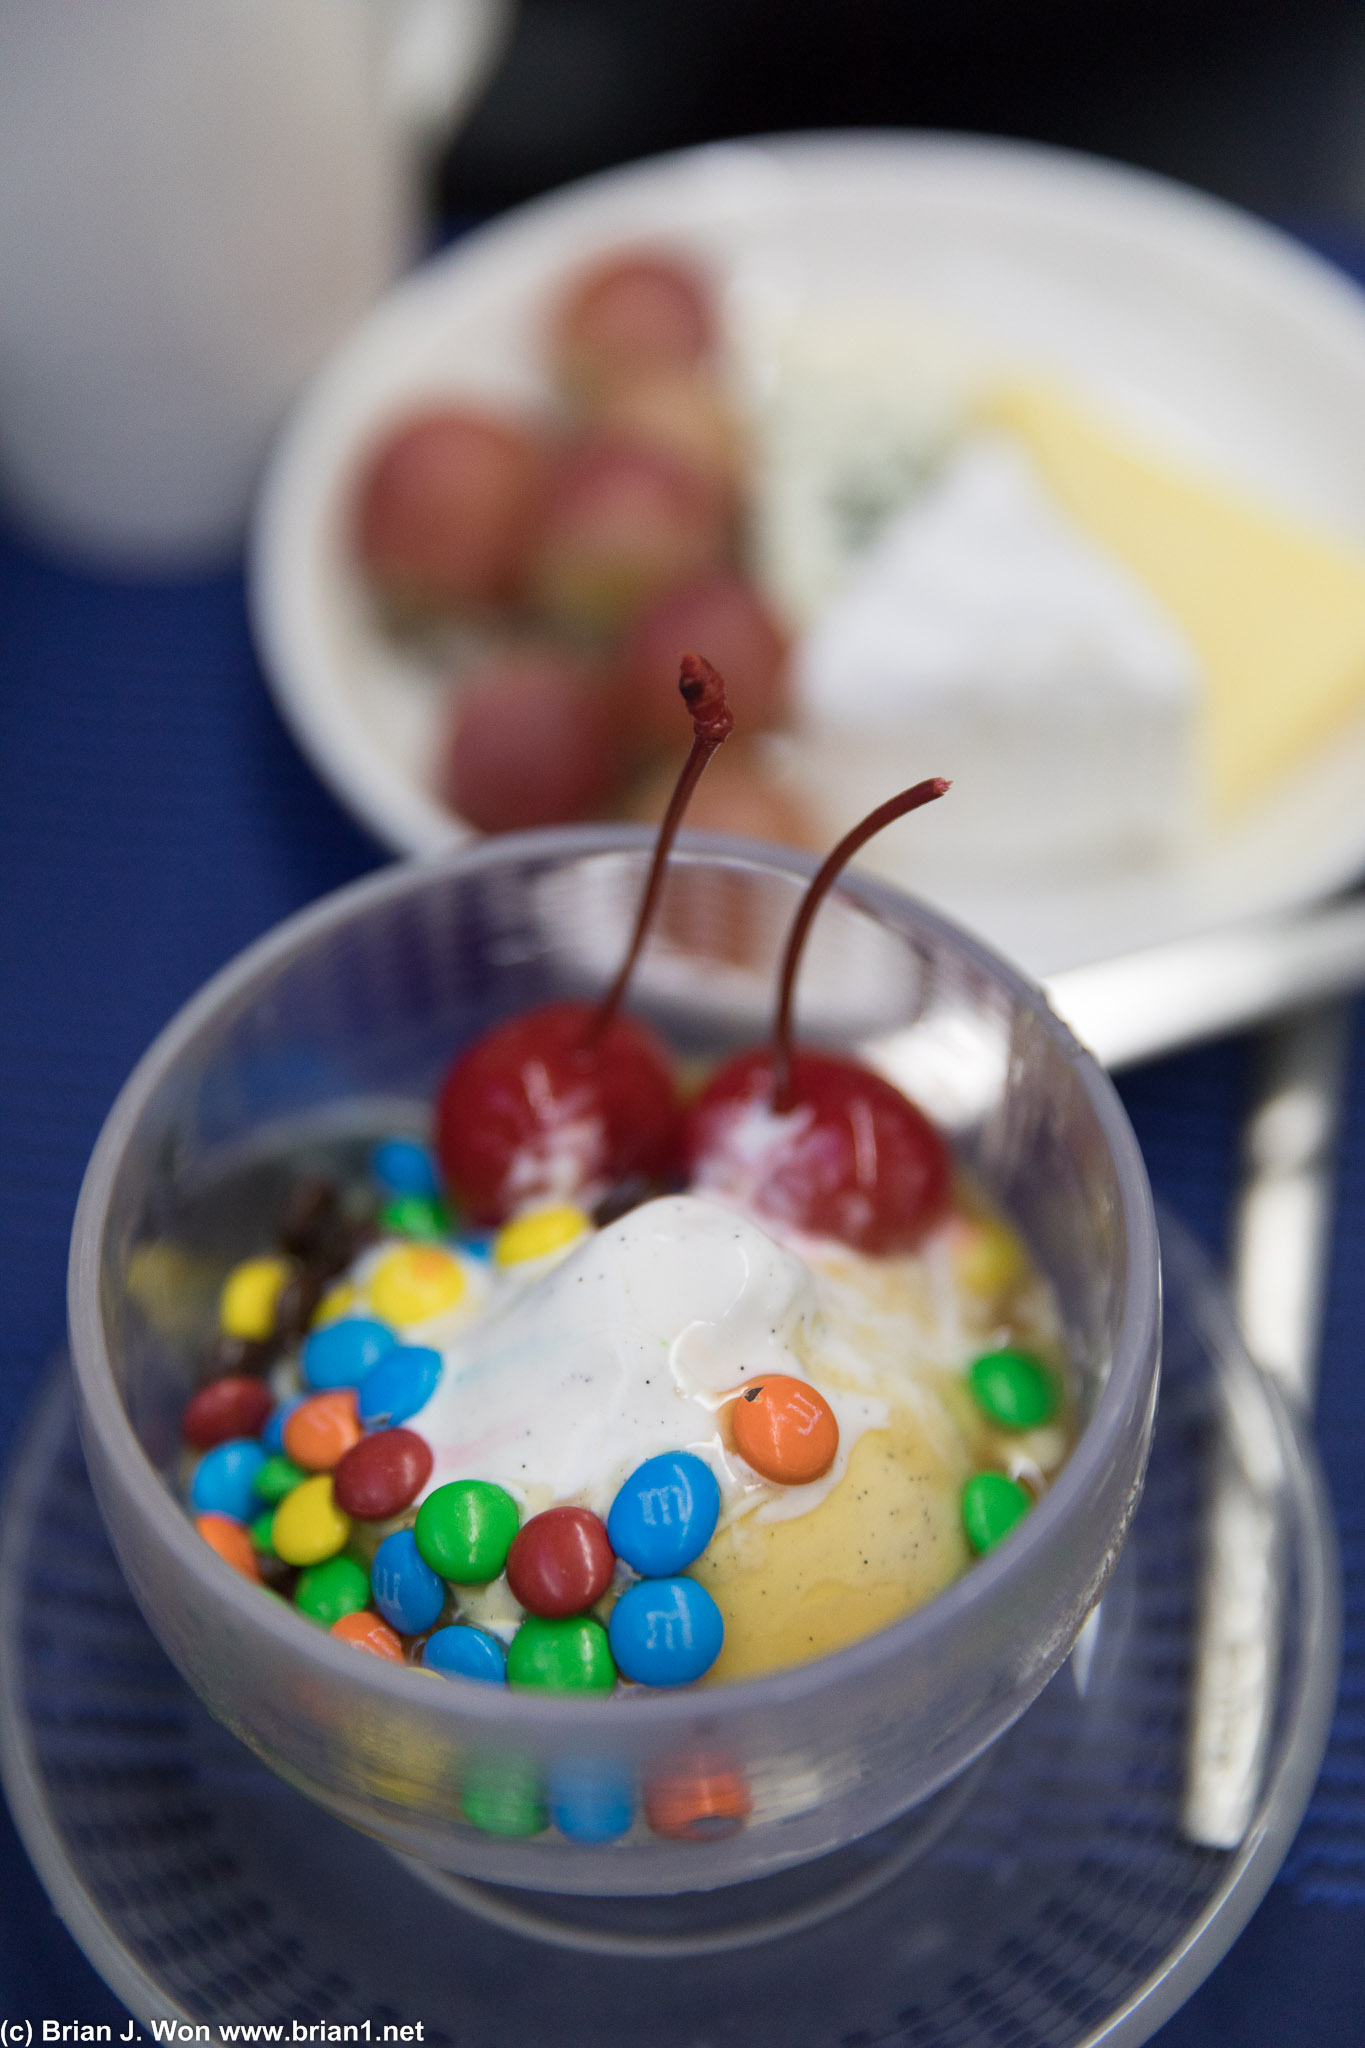 Ice cream sundae is the one thing United can do.